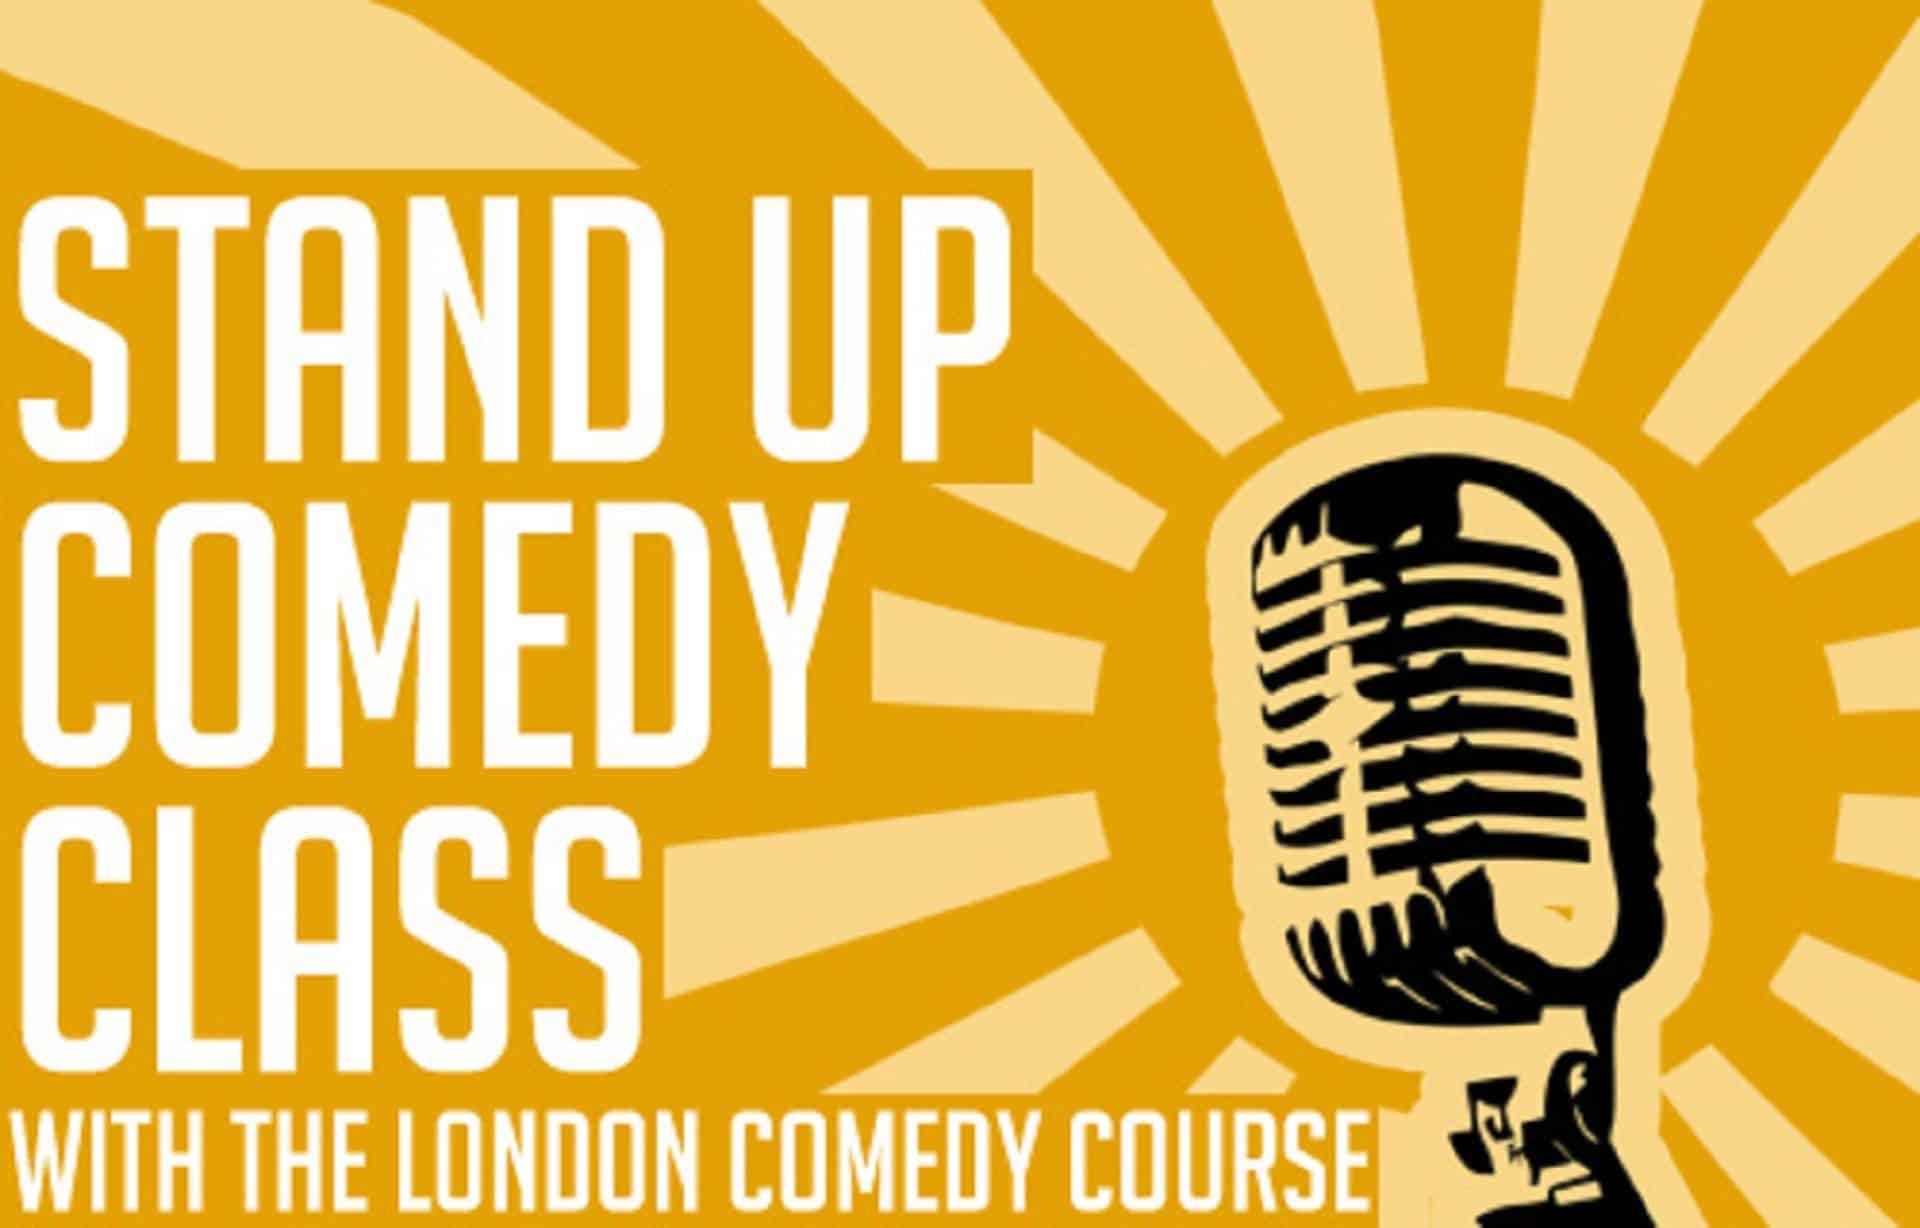 The London Comedy Course in UK